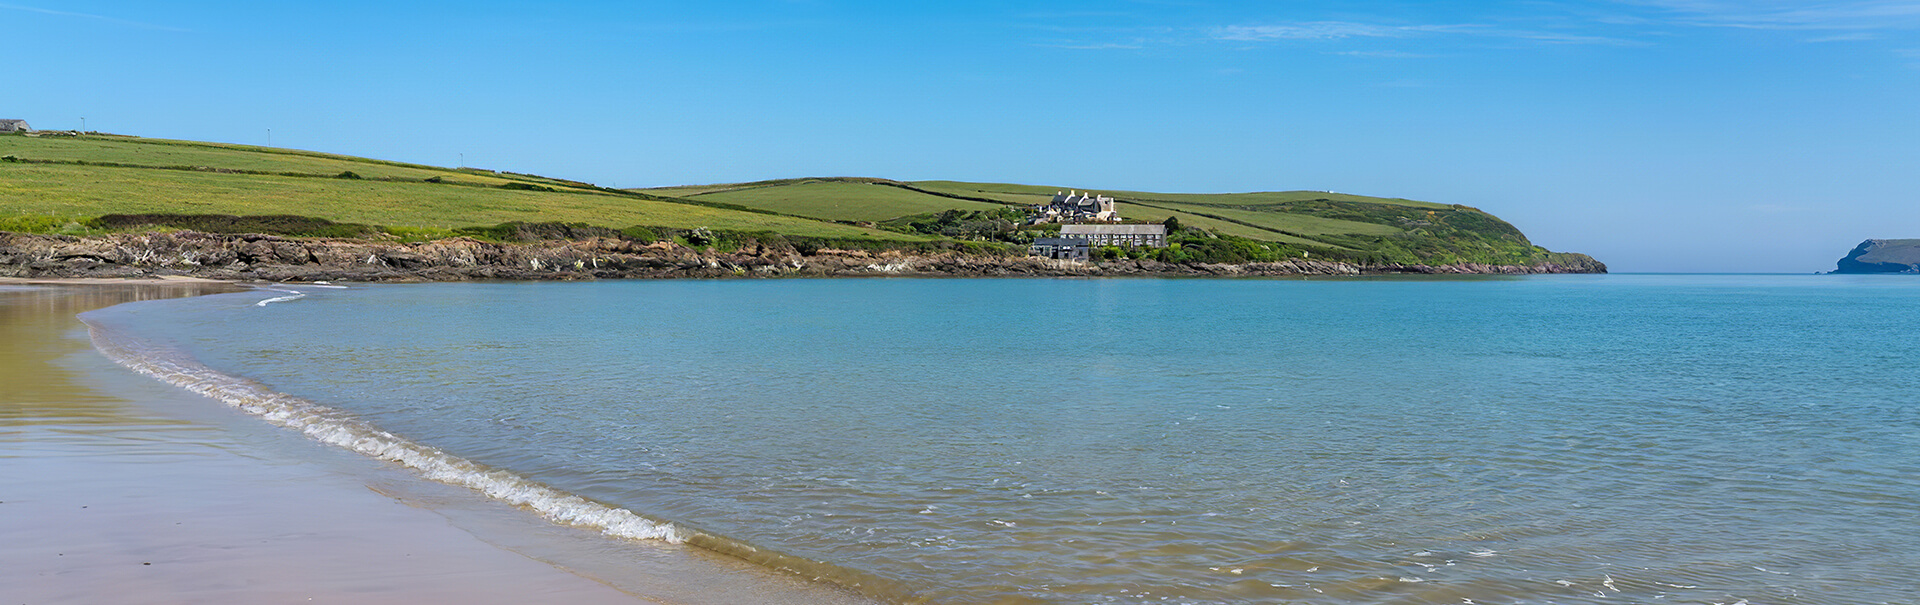 Self Catering cottages, Padstow